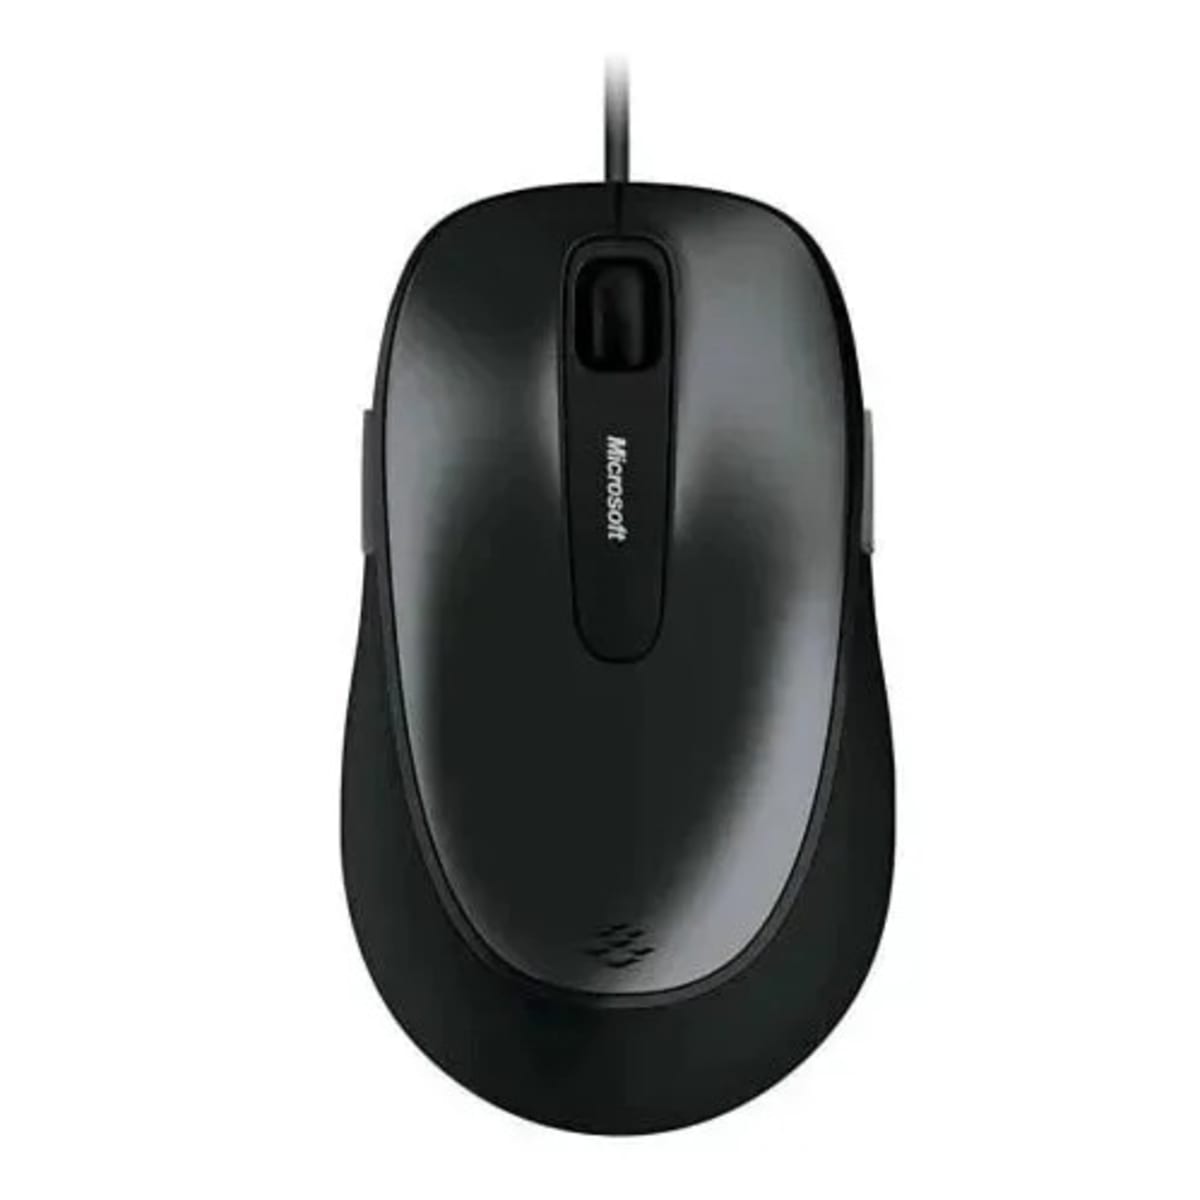 søster Premier krater Microsoft 4fd Button Usb Wired Mouse | Konga Online Shopping